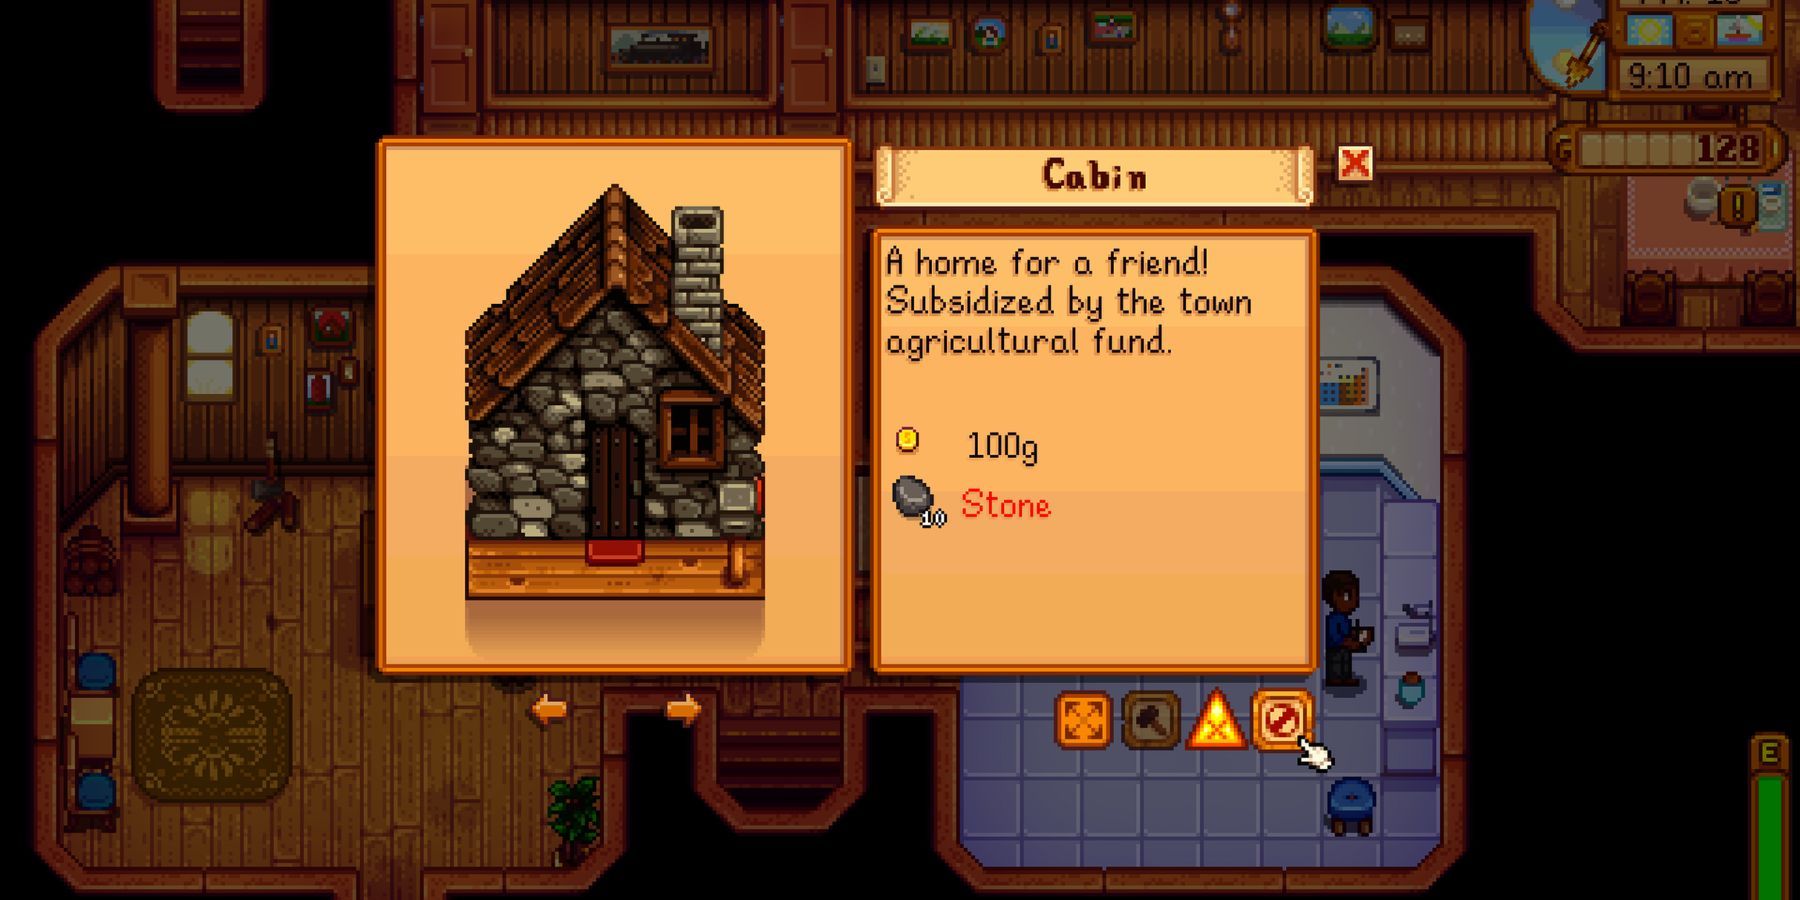 the cabin in stardew valley.